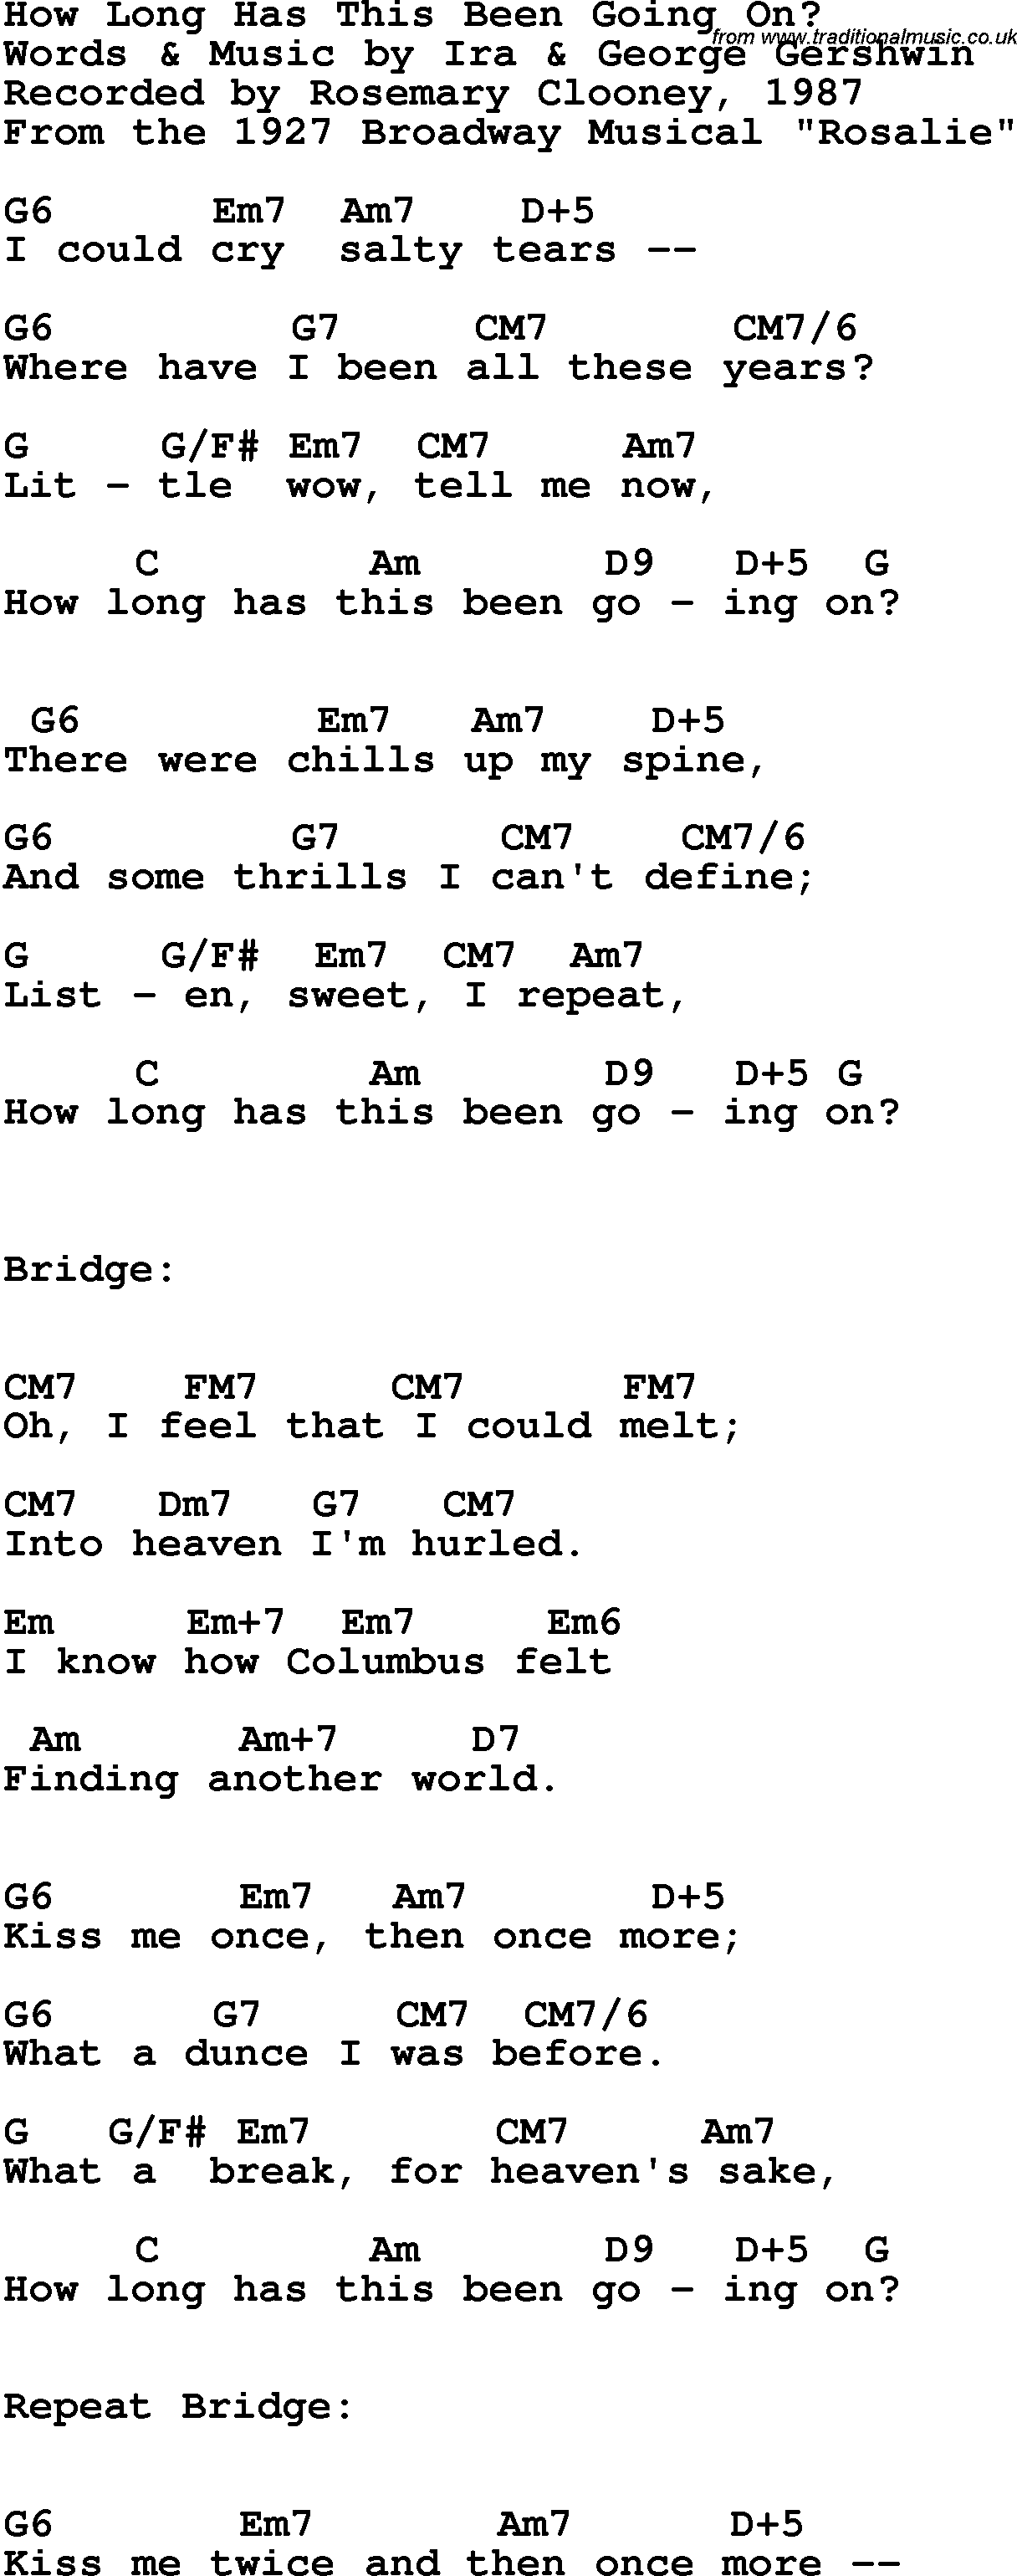 Song Lyrics with guitar chords for How Long Has This Been Going On - Rosemary Clooney, 1987